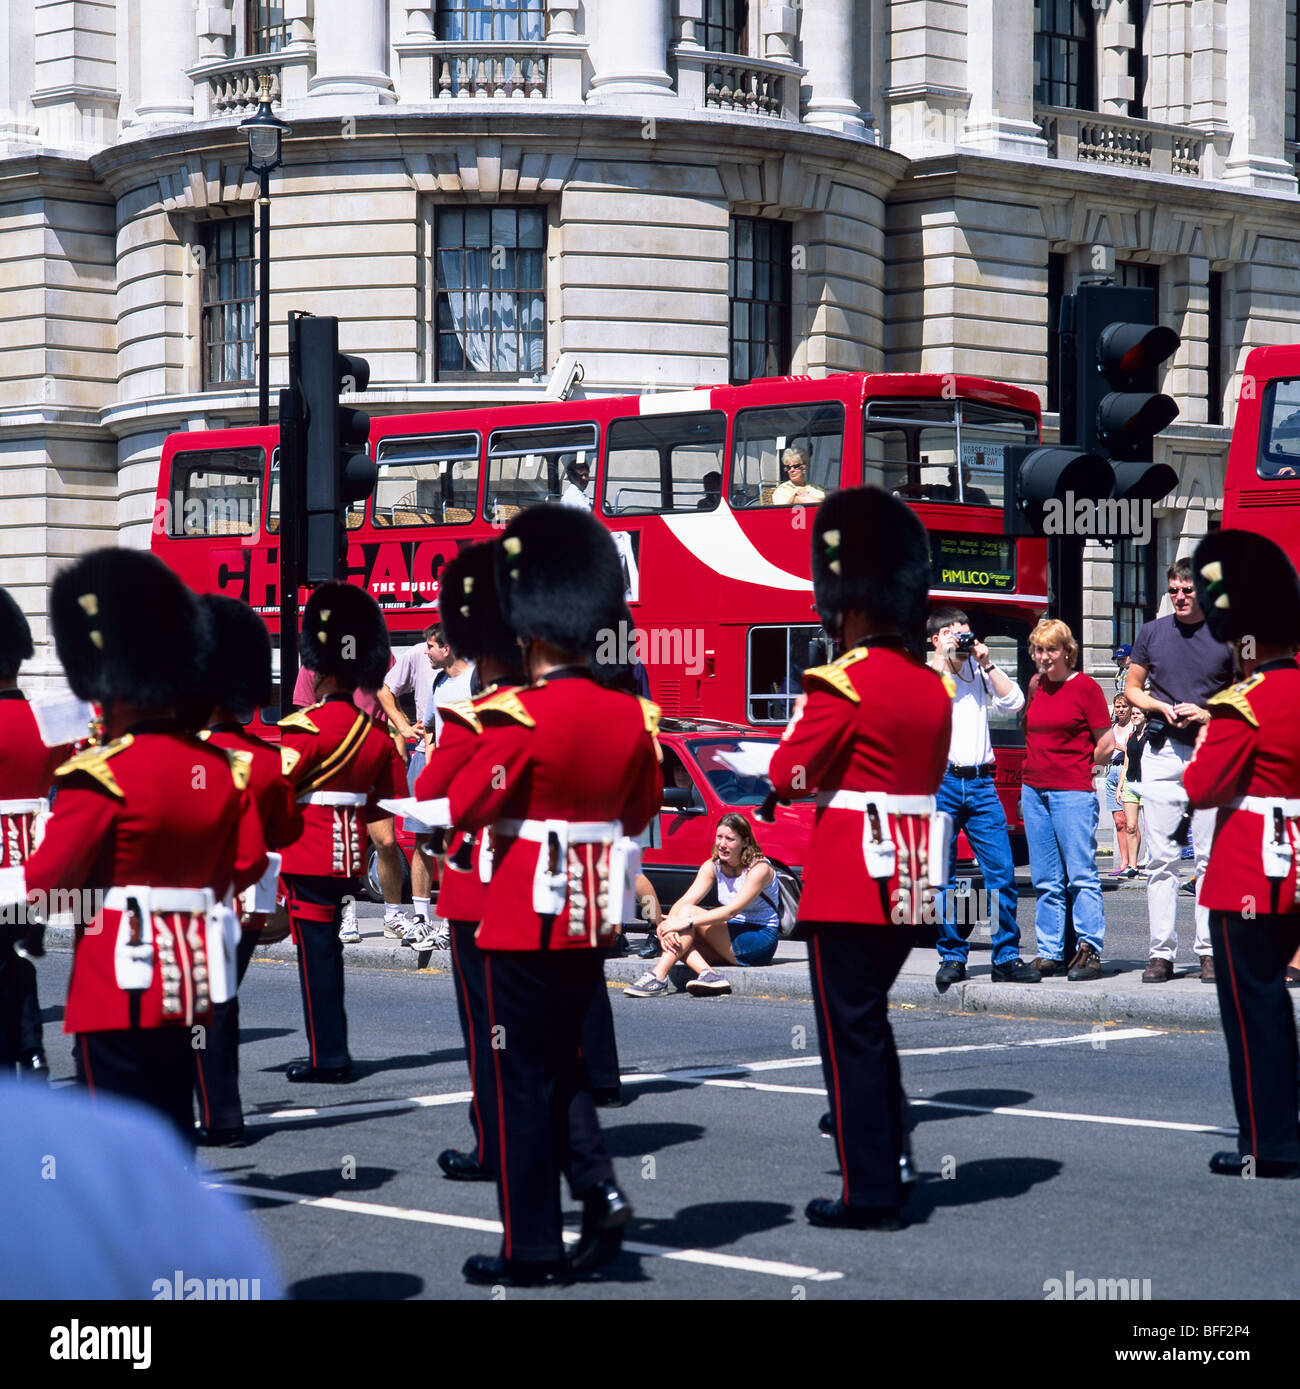 Royal Welsh guards marching band and double decker bus London Great Britain Stock Photo